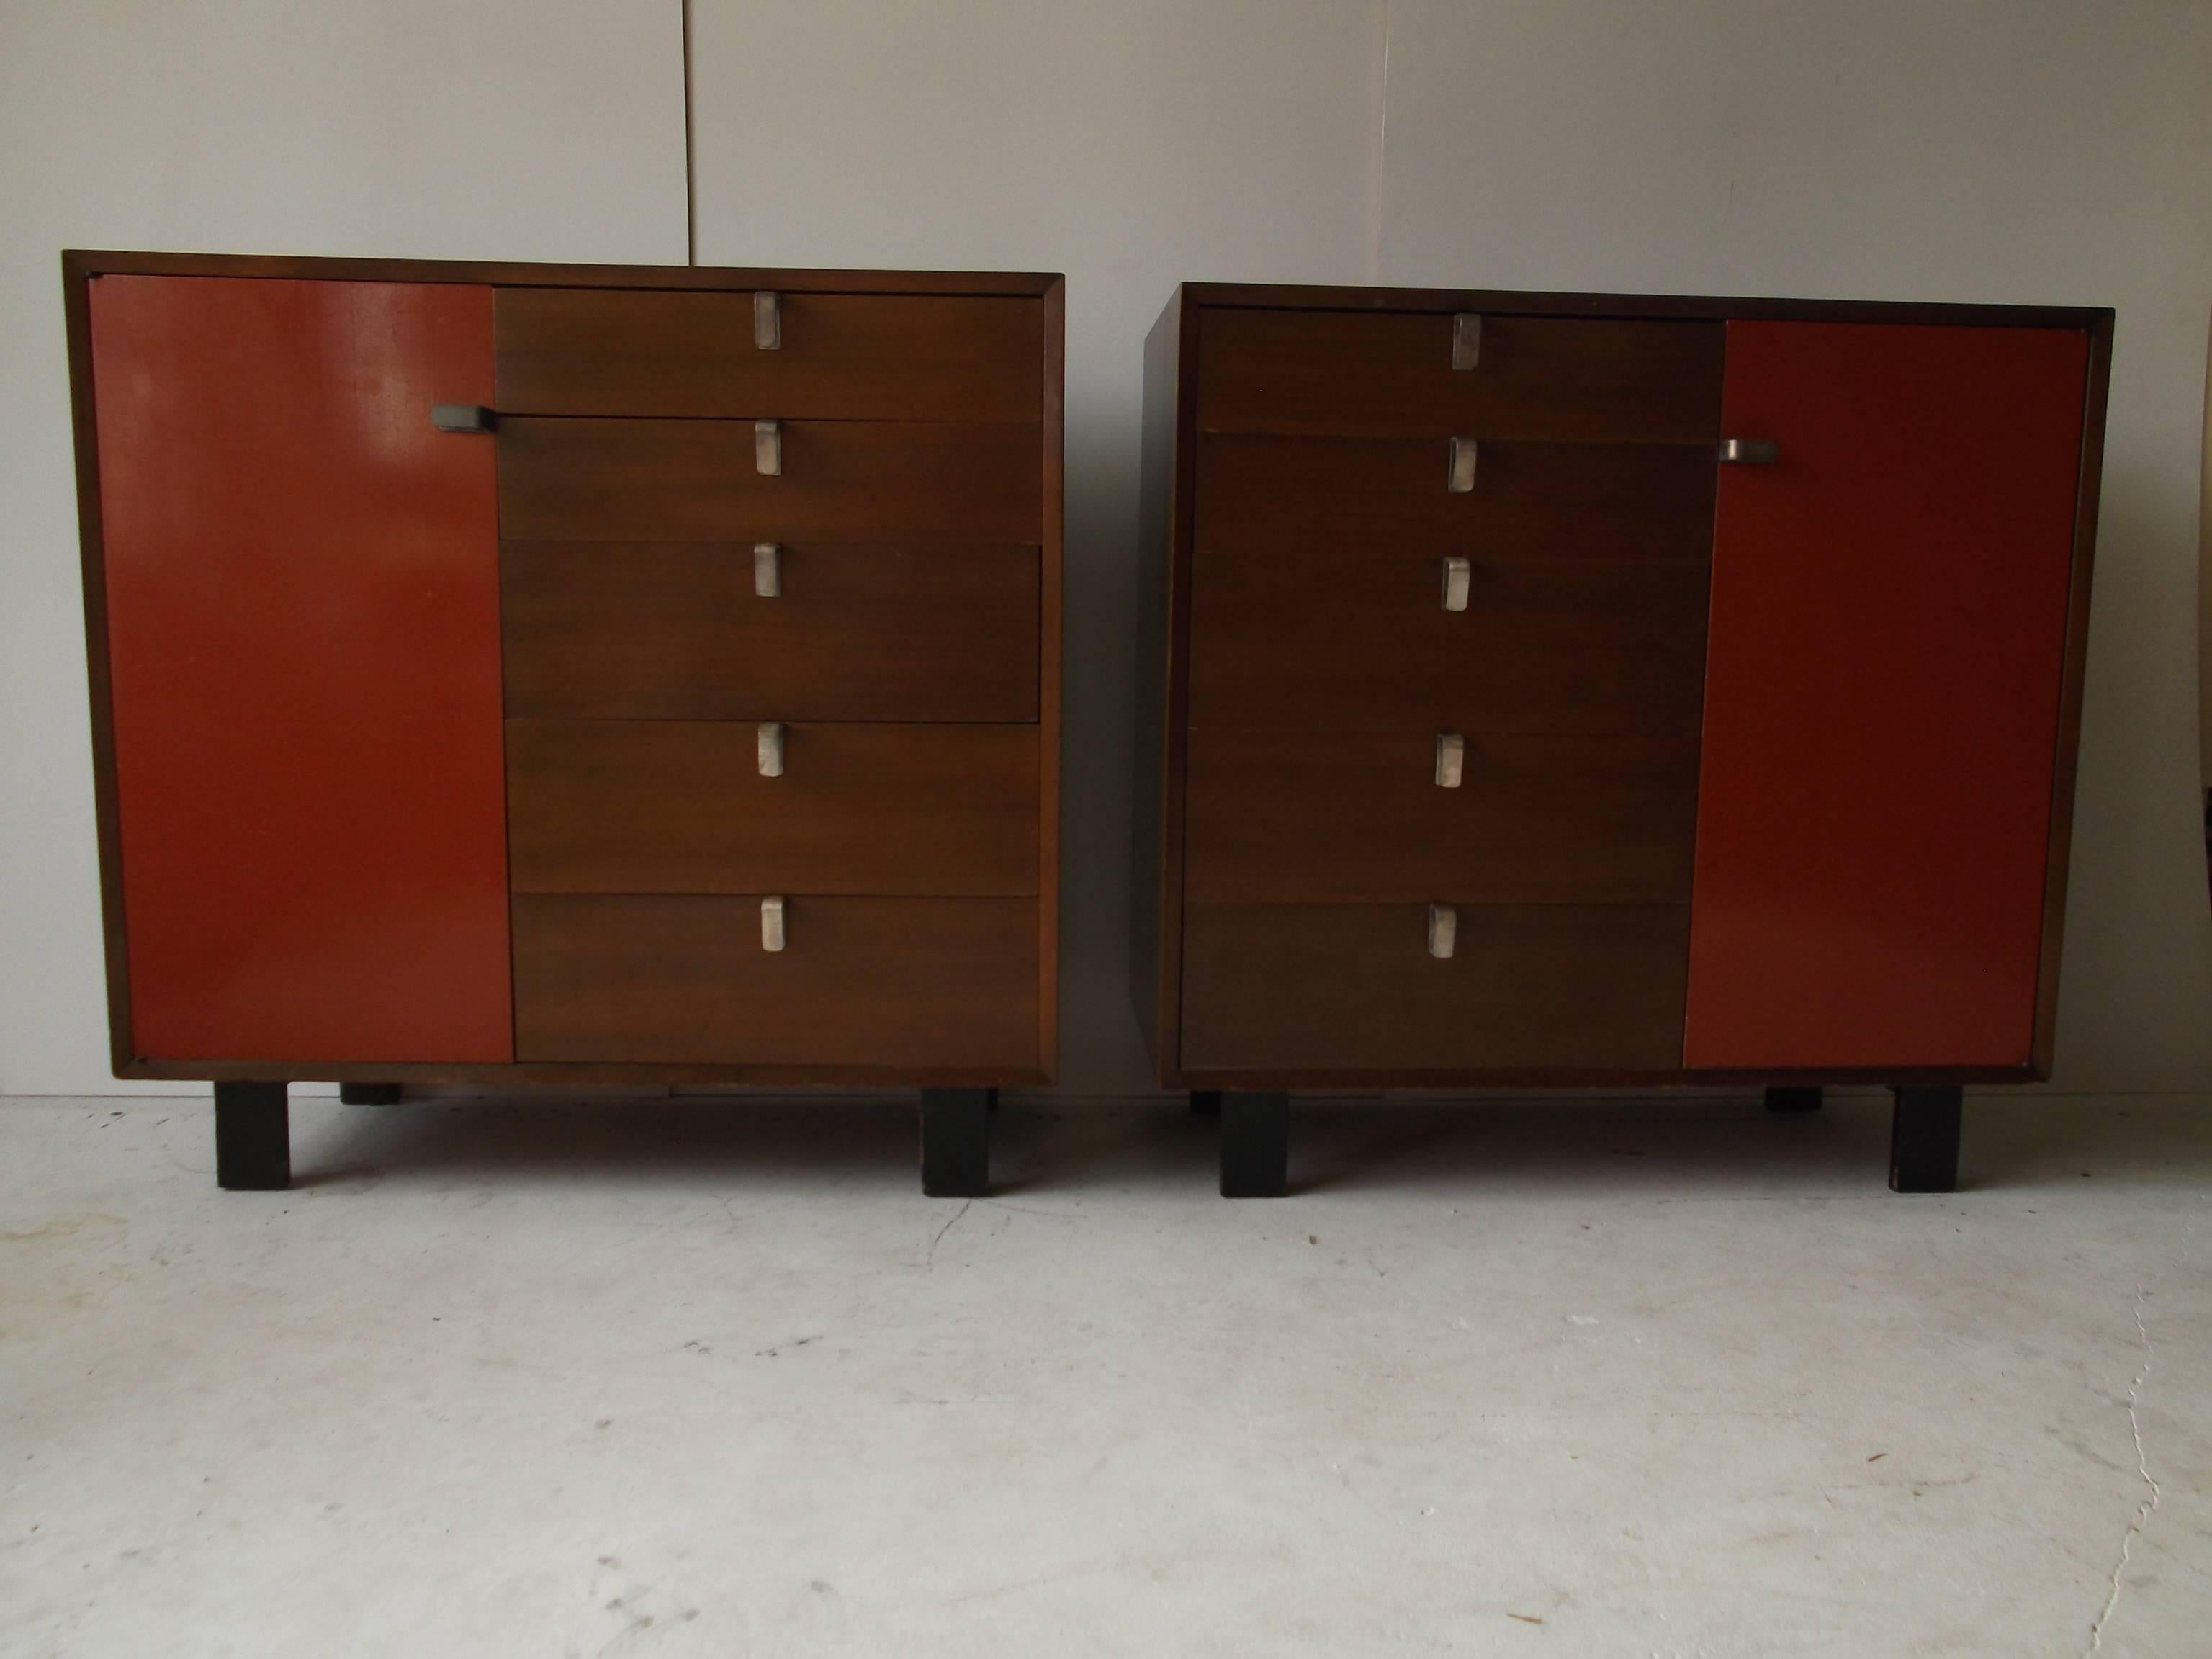 Gorgeous matched pair of original George Nelson dressers for Herman Miller in walnut, with original factory Salmon orange cabinet doors. My favorite, 